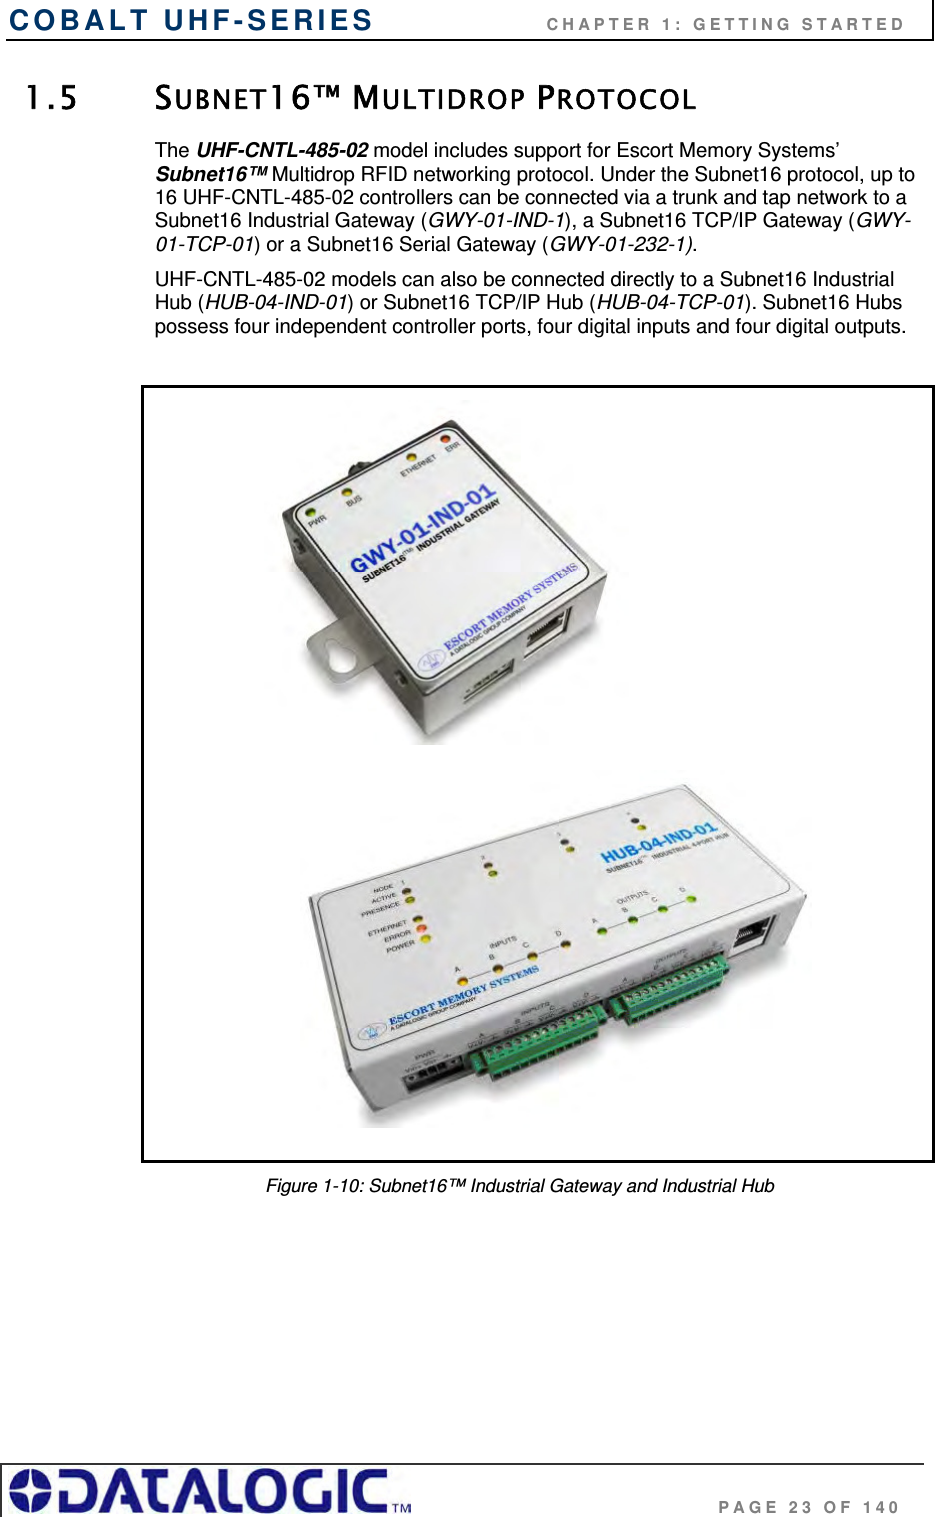 COBALT UHF-SERIES                    CHAPTER 1: GETTING STARTED                                     PAGE 23 OF 140 1.5 SUBNET16™ MULTIDROP PROTOCOL The UHF-CNTL-485-02 model includes support for Escort Memory Systems’ Subnet16™ Multidrop RFID networking protocol. Under the Subnet16 protocol, up to 16 UHF-CNTL-485-02 controllers can be connected via a trunk and tap network to a Subnet16 Industrial Gateway (GWY-01-IND-1), a Subnet16 TCP/IP Gateway (GWY-01-TCP-01) or a Subnet16 Serial Gateway (GWY-01-232-1).  UHF-CNTL-485-02 models can also be connected directly to a Subnet16 Industrial Hub (HUB-04-IND-01) or Subnet16 TCP/IP Hub (HUB-04-TCP-01). Subnet16 Hubs possess four independent controller ports, four digital inputs and four digital outputs.                        Figure 1-10: Subnet16™ Industrial Gateway and Industrial Hub   